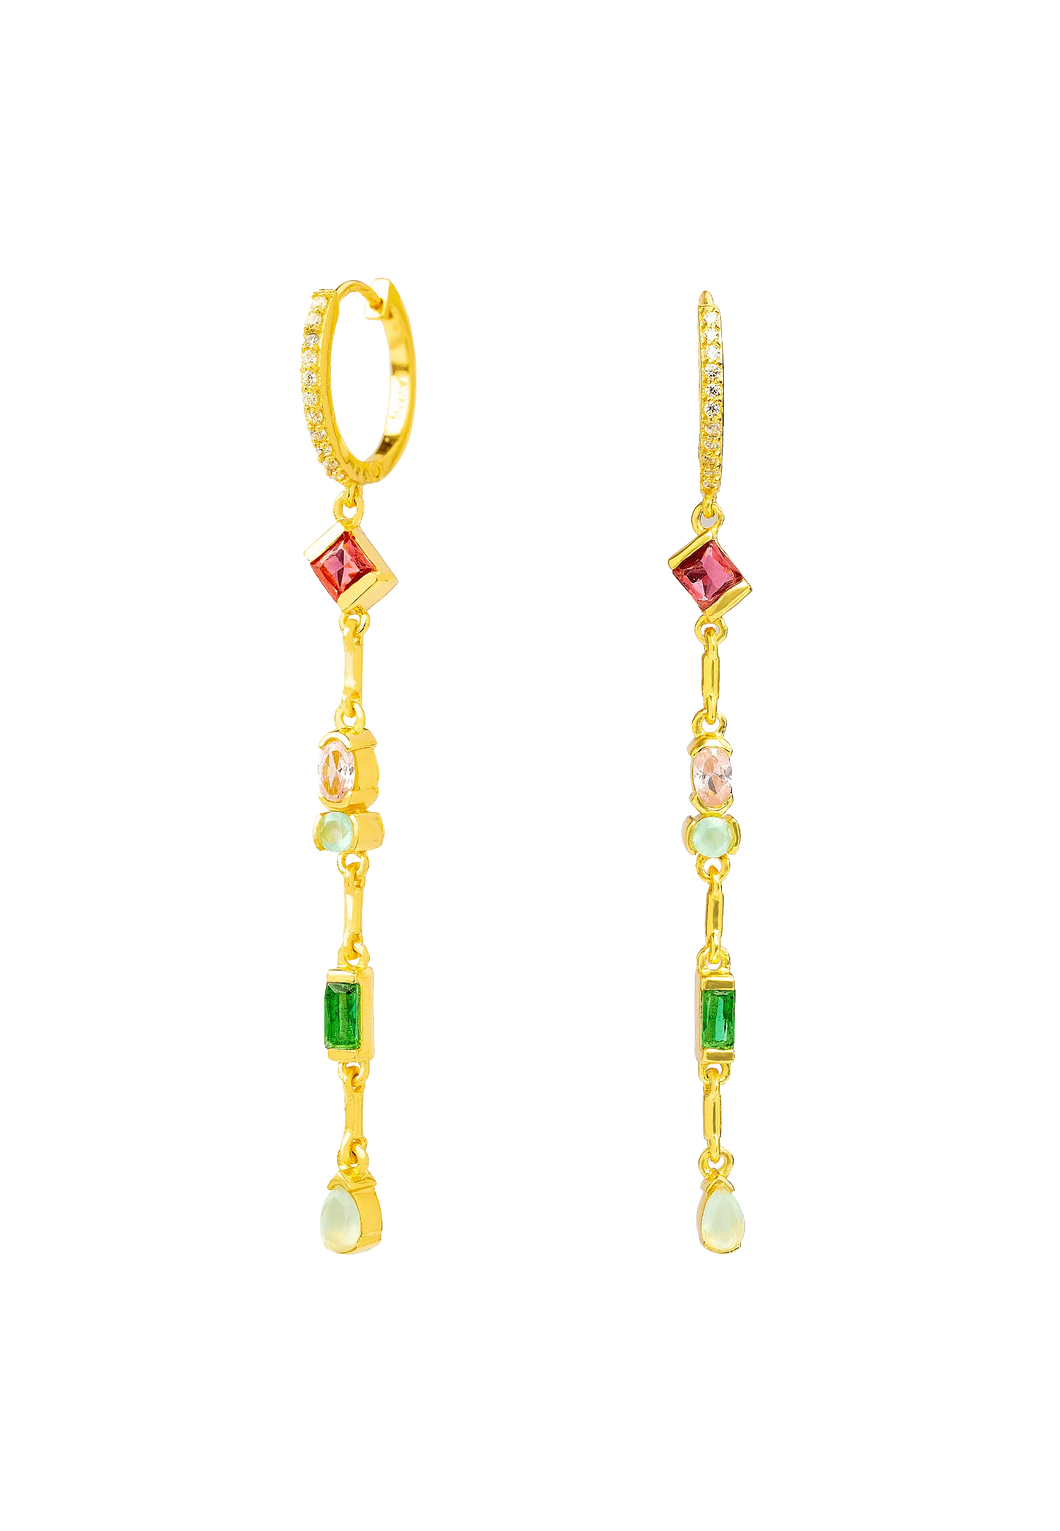 Hoop earrings with pendant and Catalan closure.